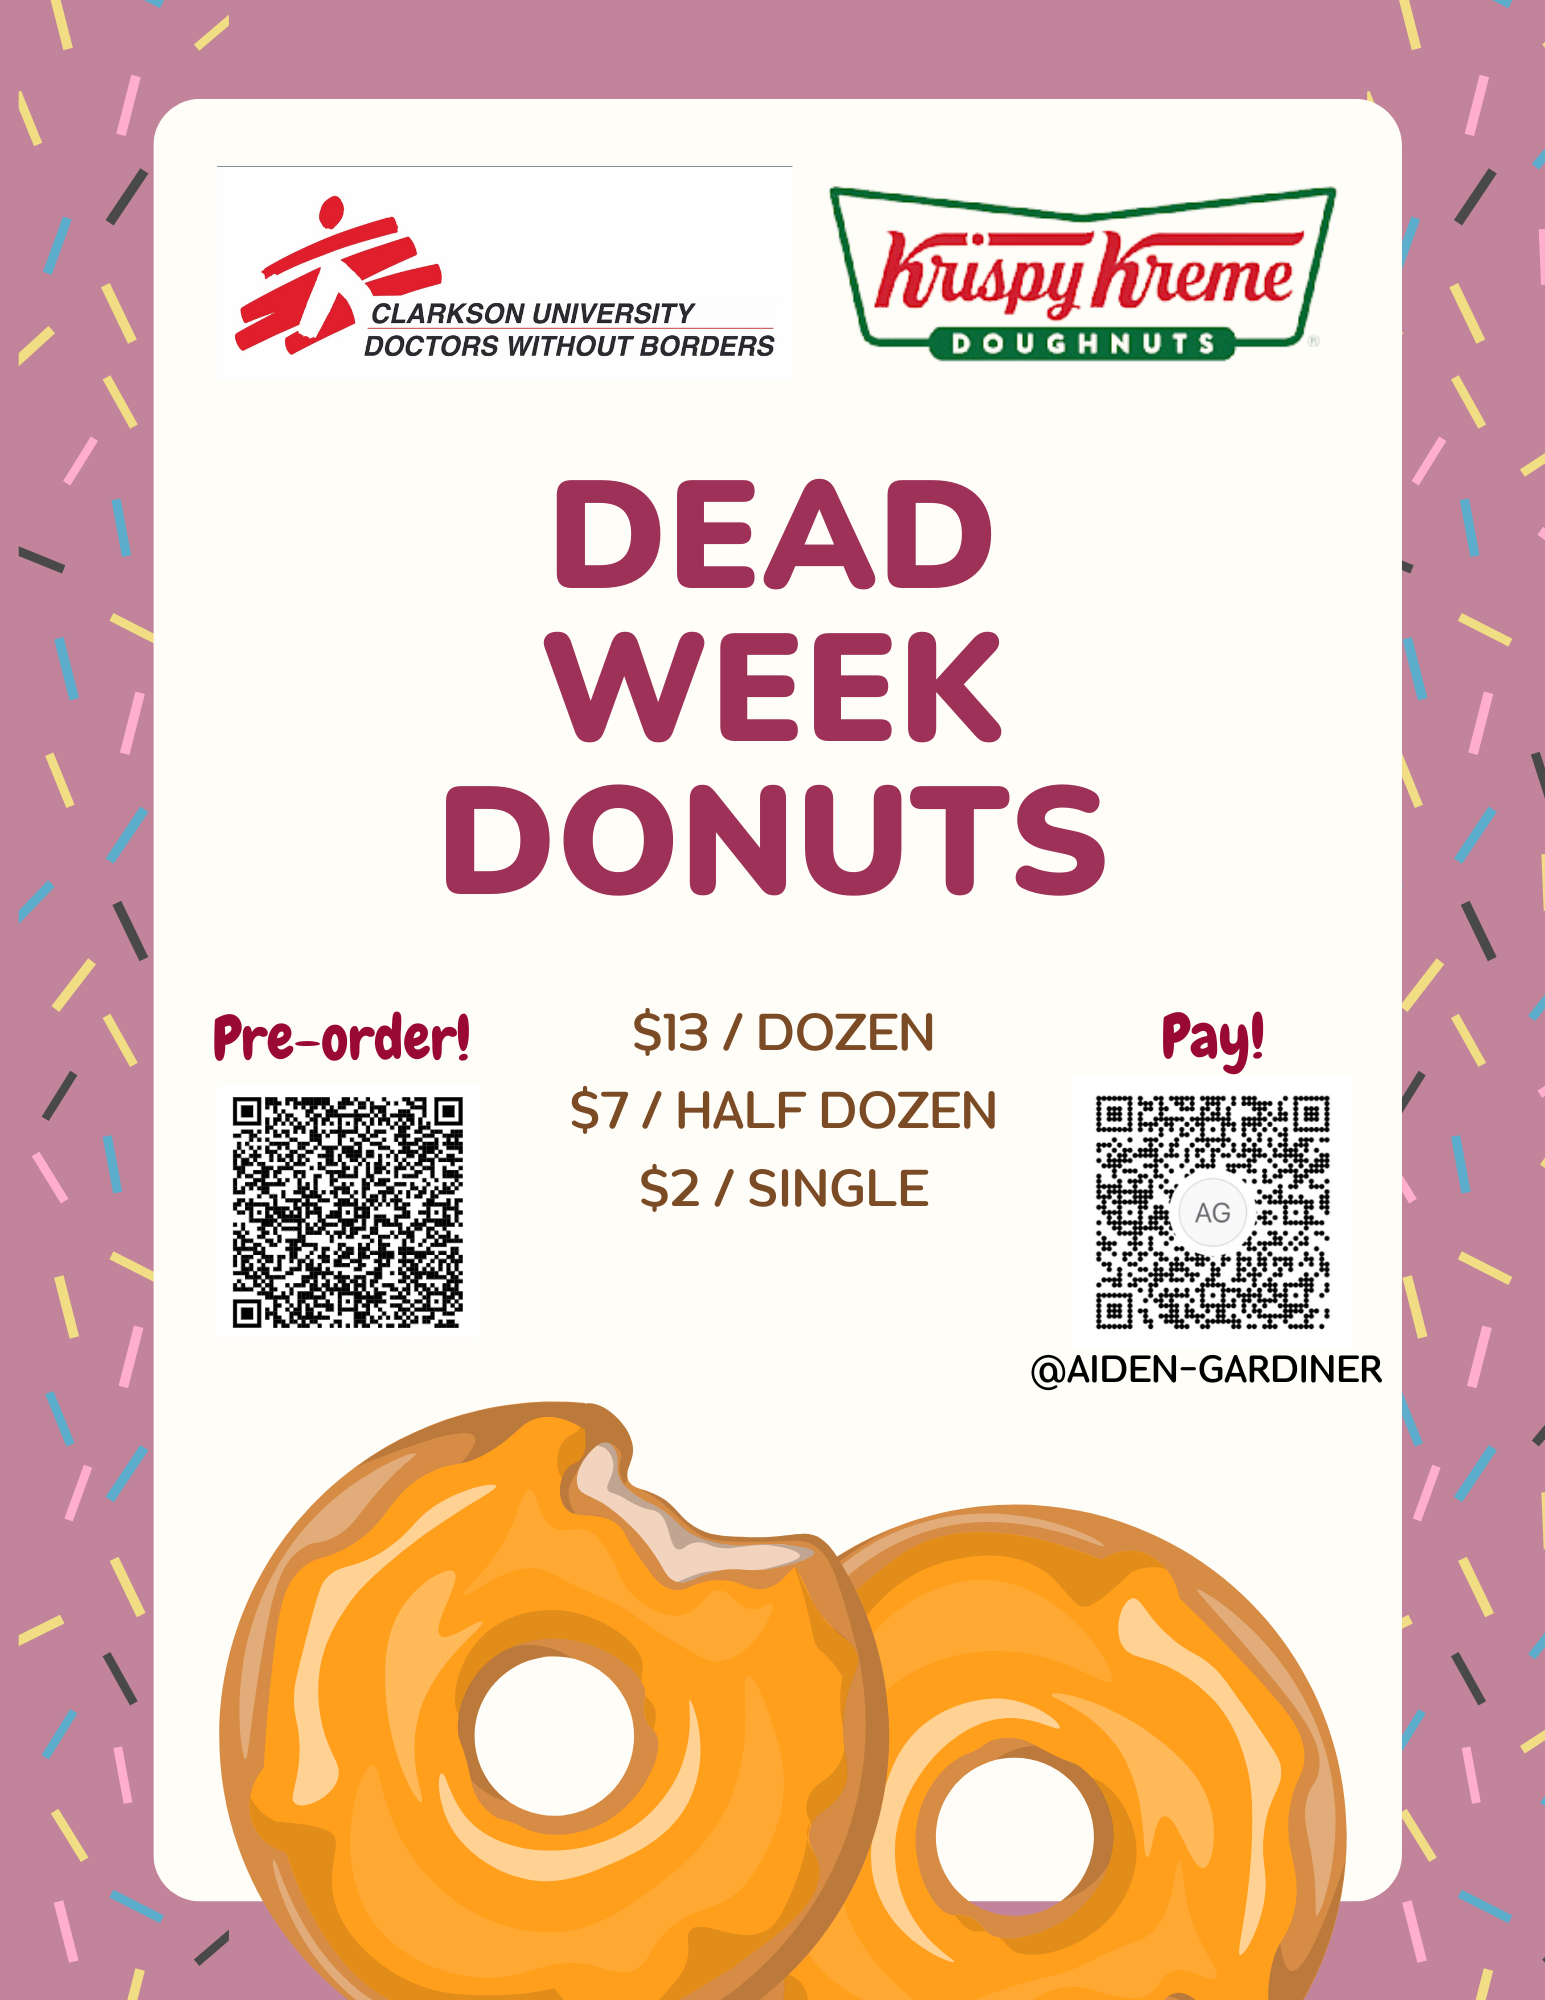 Pink flyer with two glazed donuts displayed. Logos for “Clarkson University Doctors Without Borders” and “Krispy Kreme Doughnuts” displayed. Flyer reads “Dead Week Donuts. $13 per dozen. $7 per half dozen. $2 per single.” QR code labeled “Pre-Order!” and another QR code labeled “Pay!” are also shown. Venmo username for payment reads “Aiden-Gardiner.”